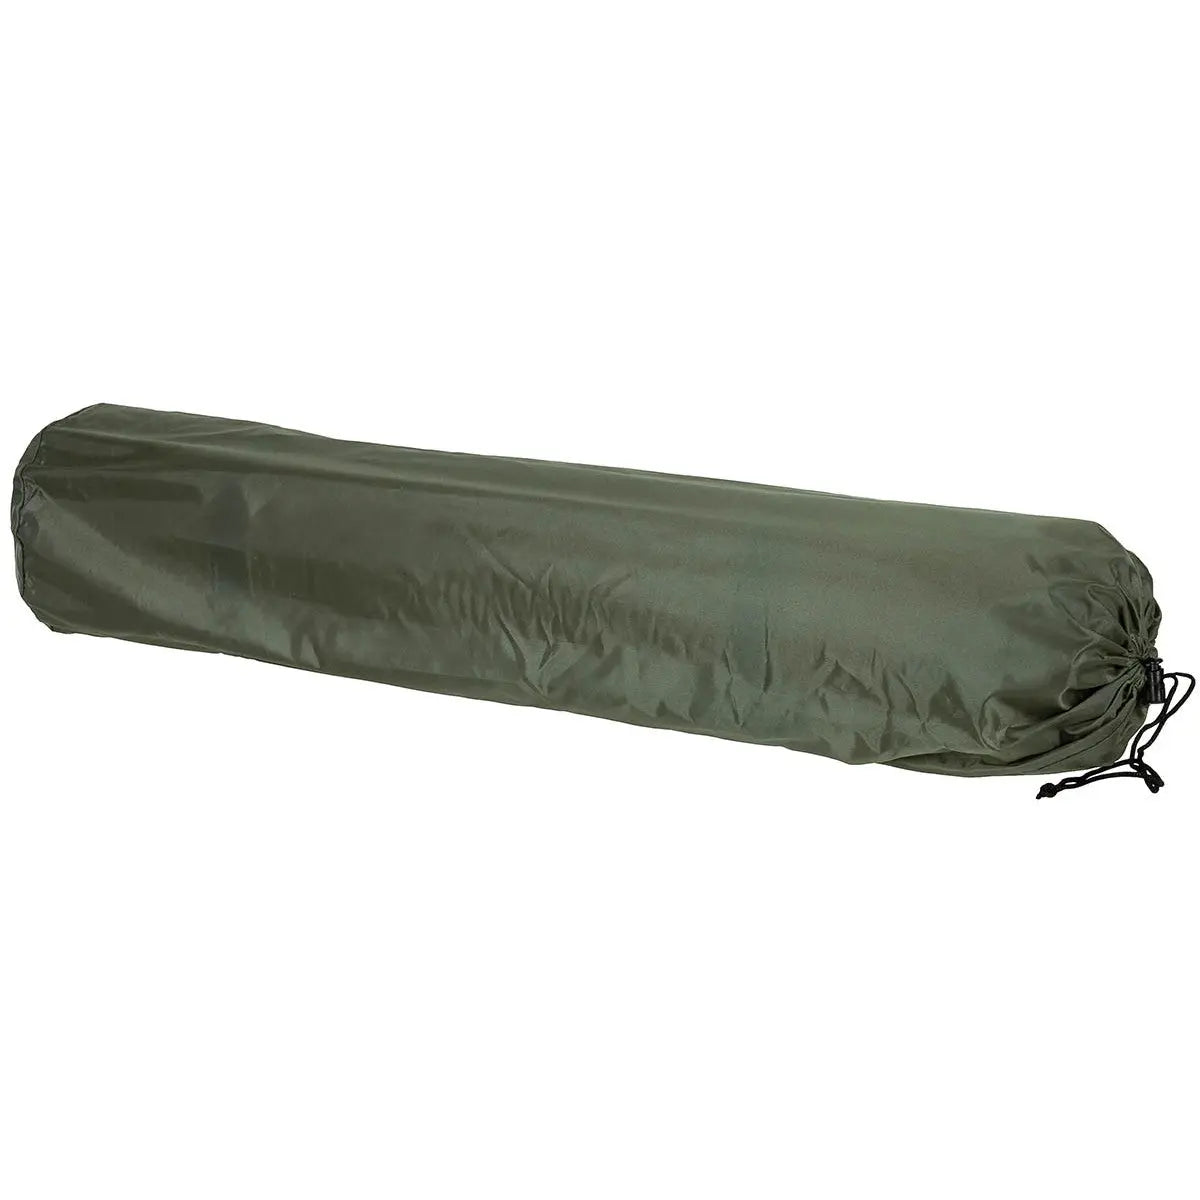 Thermal Pad, self-inflatable, OD green